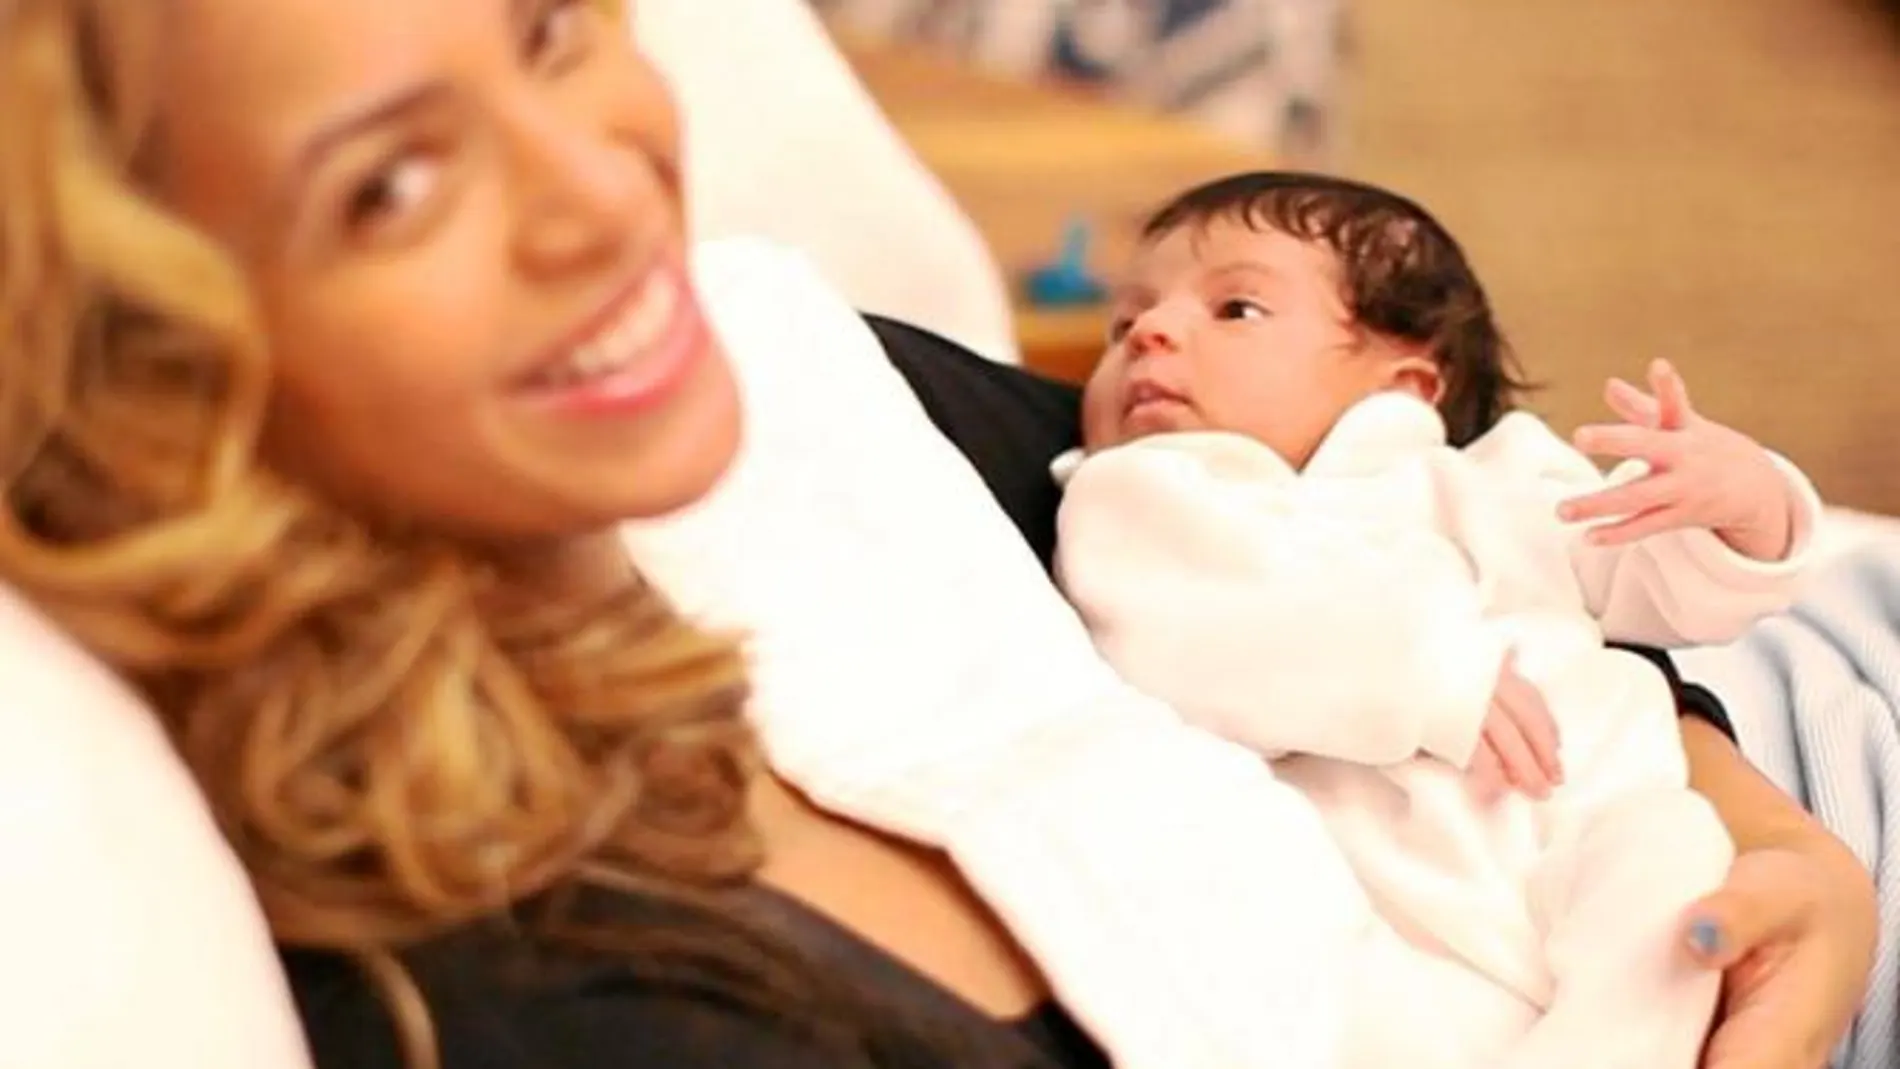 Con ustedes Blue Ivy